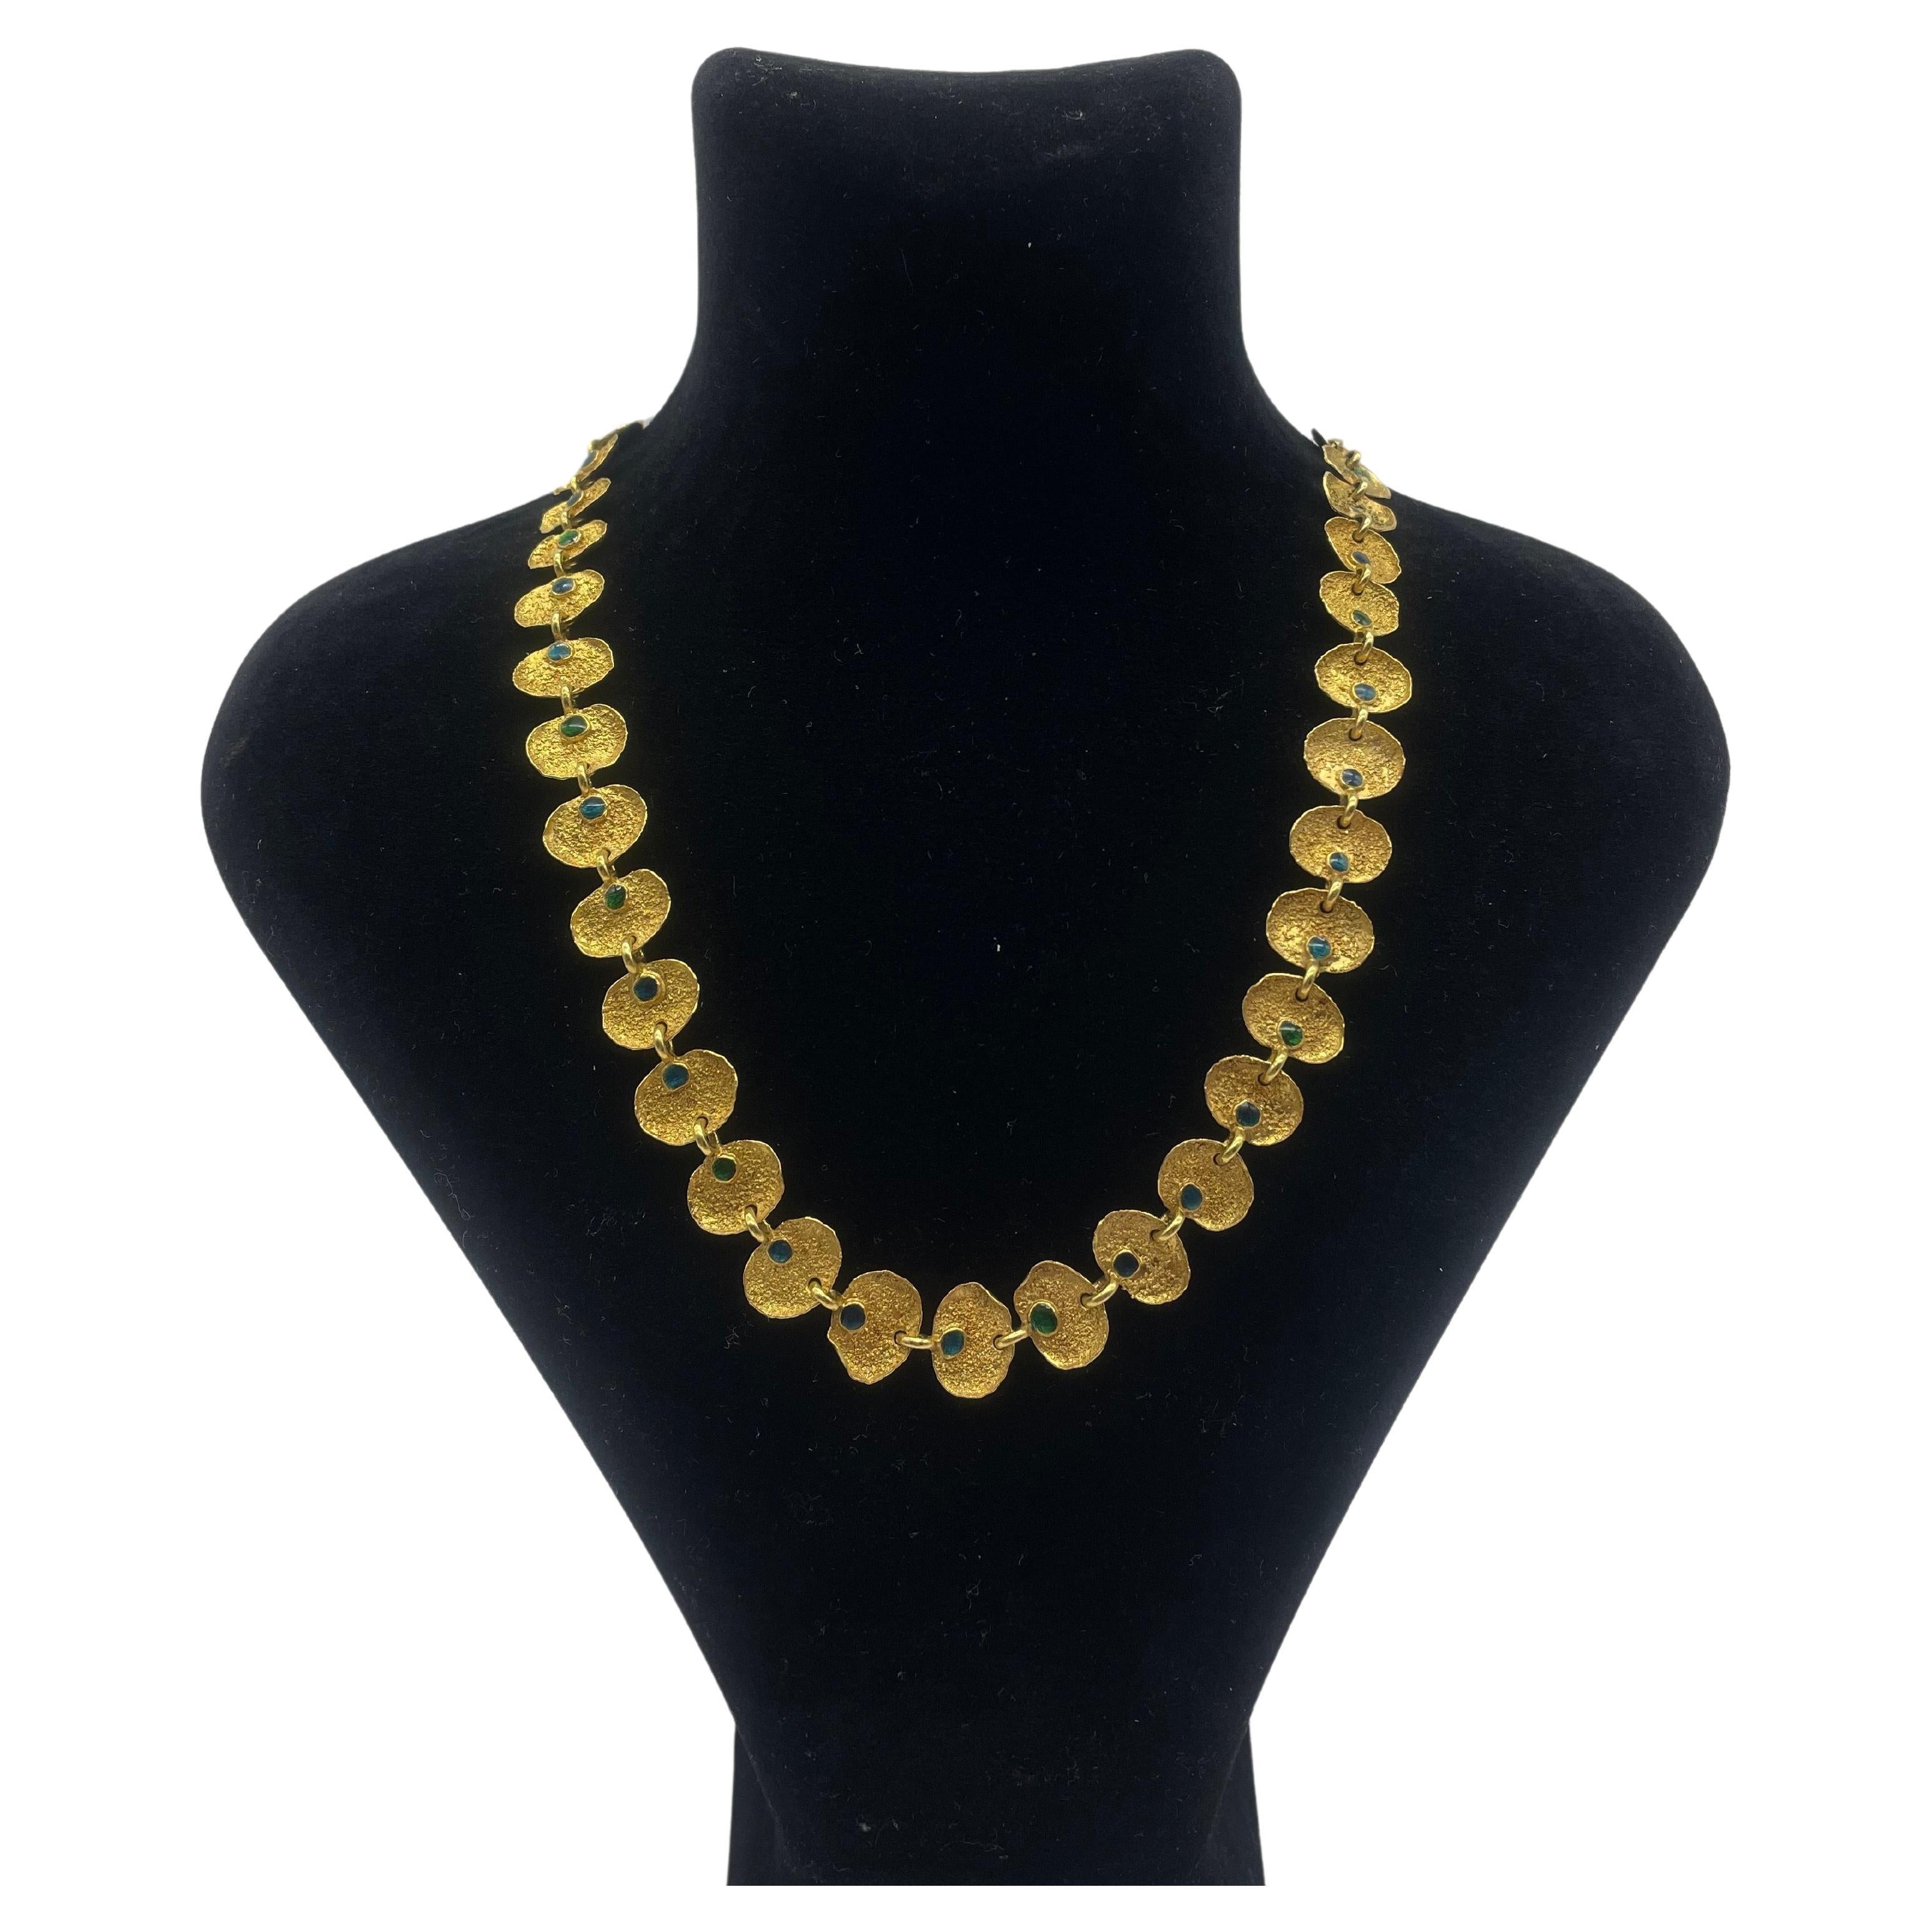 Majestic old German goldsmith master necklace made of 21k gold For Sale